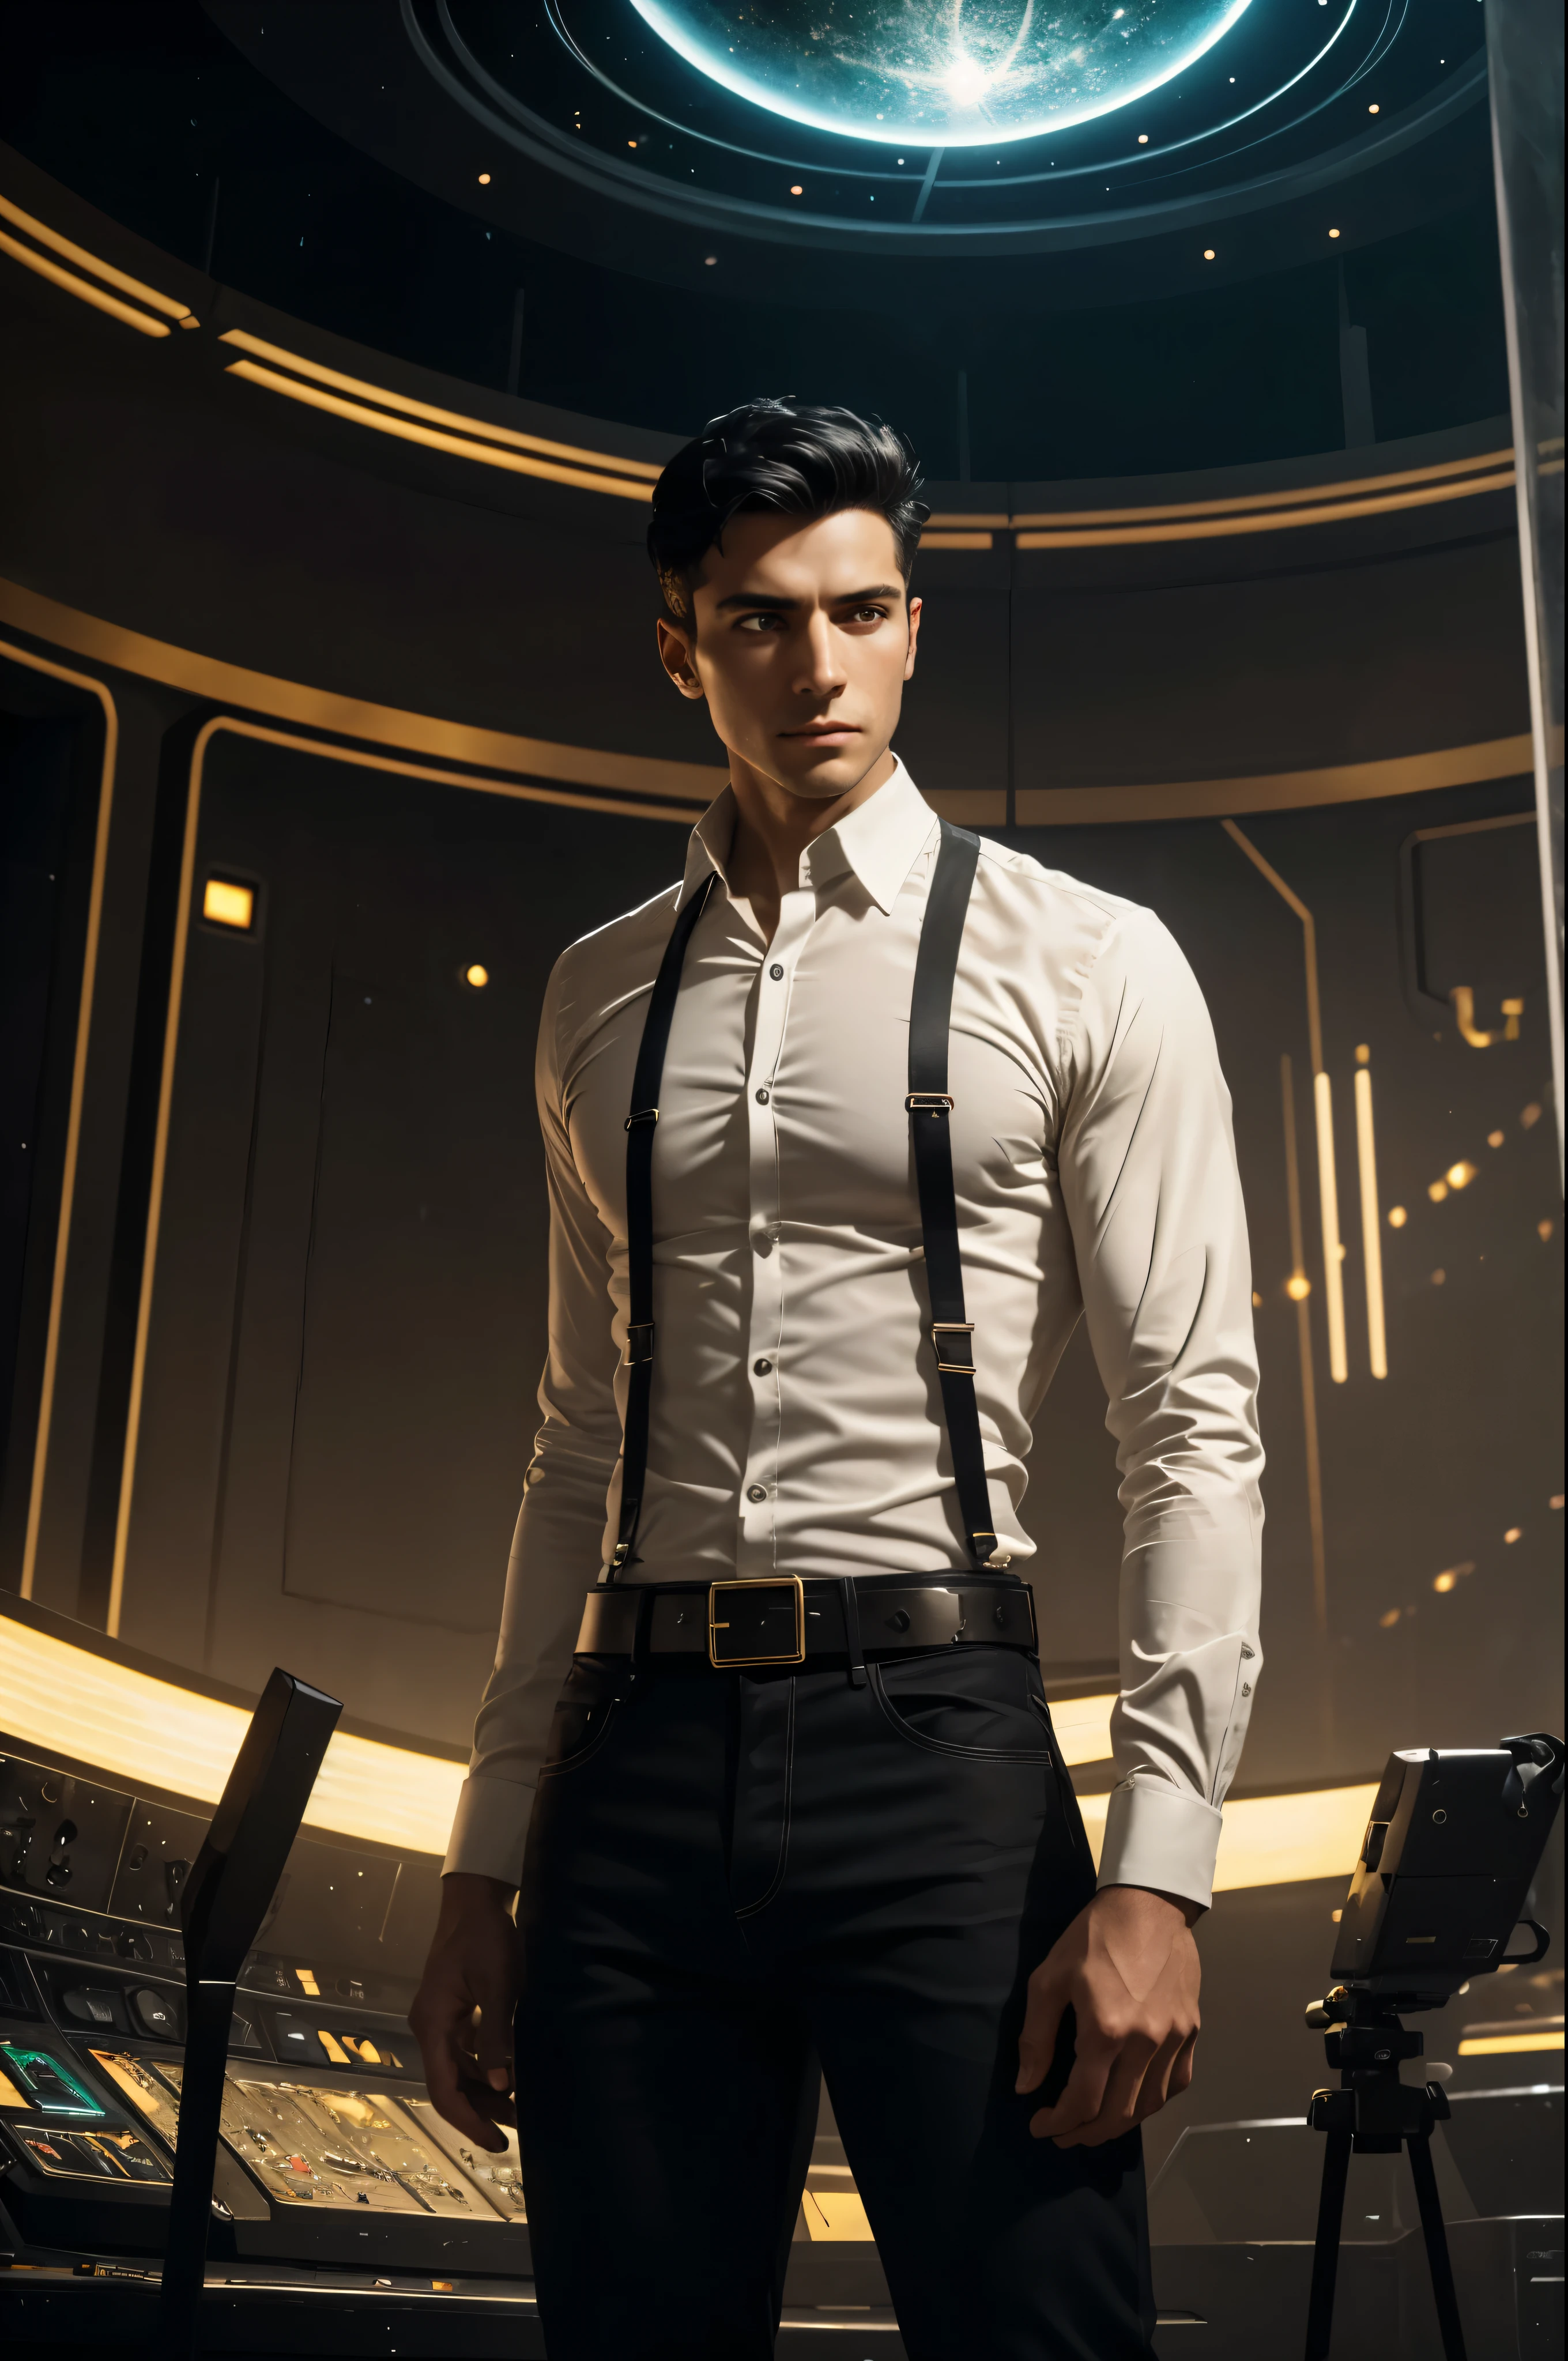 A 29-year-old man with short black hair in a fade, forest green eyes, stands facing the camera at the center of the image. He wears a white satin shirt with the collar buttons undone, paired with tight-fitting black skinny jeans and a shiny silver belt. His hands are held out in front of him, conjuring a fluorescent blue energy ball, surrounded by exploding musical notes. The scene is set inside a spaceship, reminiscent of the aesthetics of the Stargate Universe series, with sepia-toned backgrounds illuminated by brass and other hues